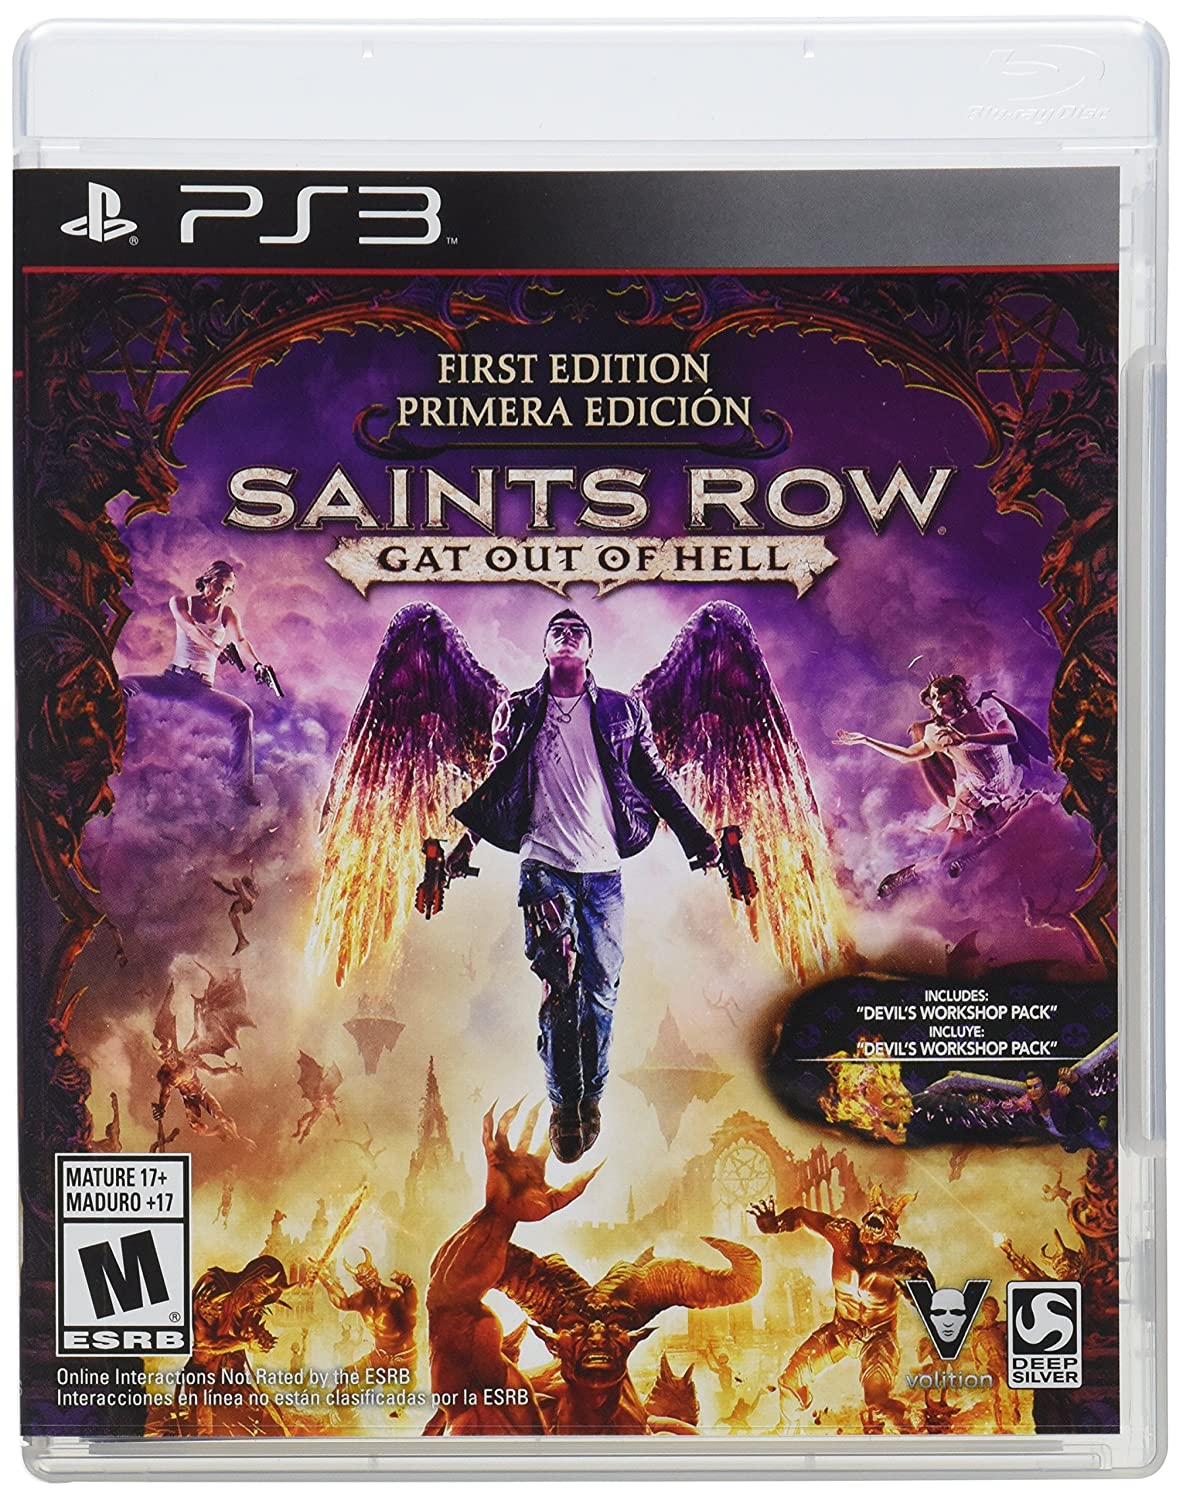 Saints Row Gat Out of Hell PS3